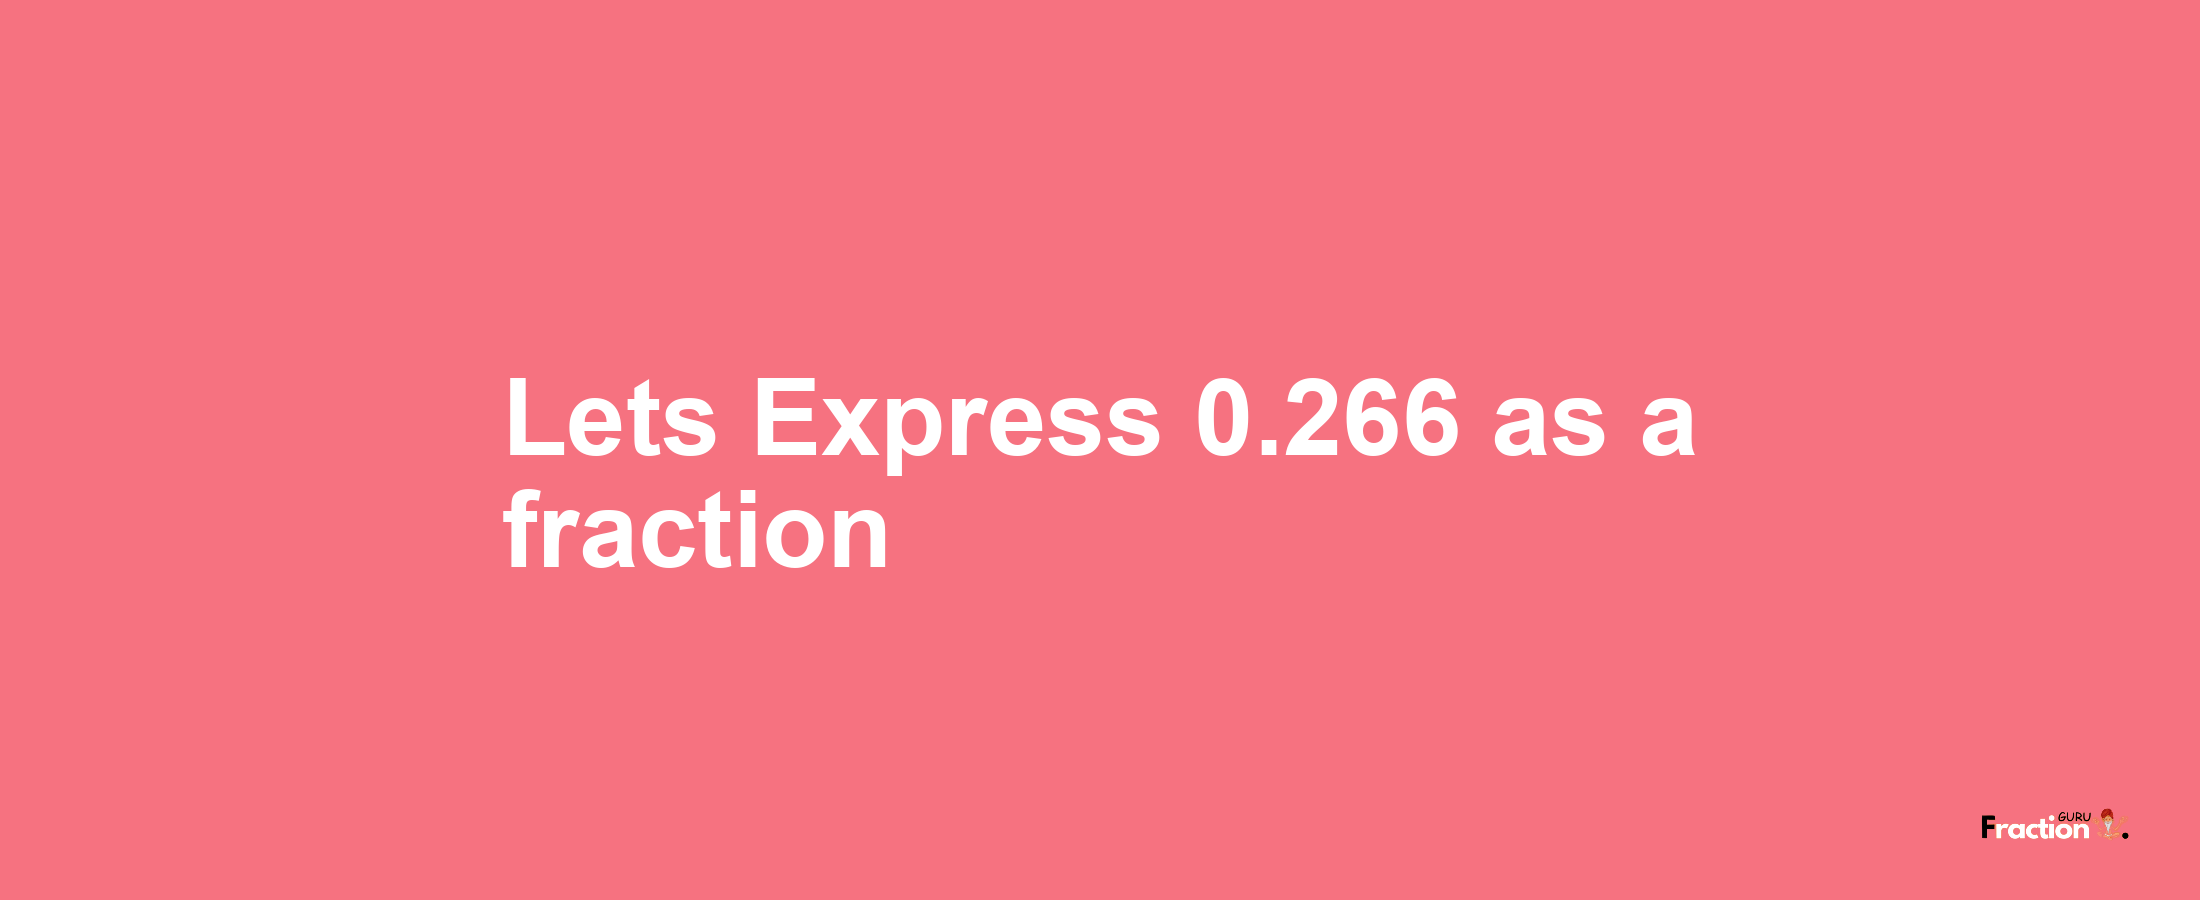 Lets Express 0.266 as afraction